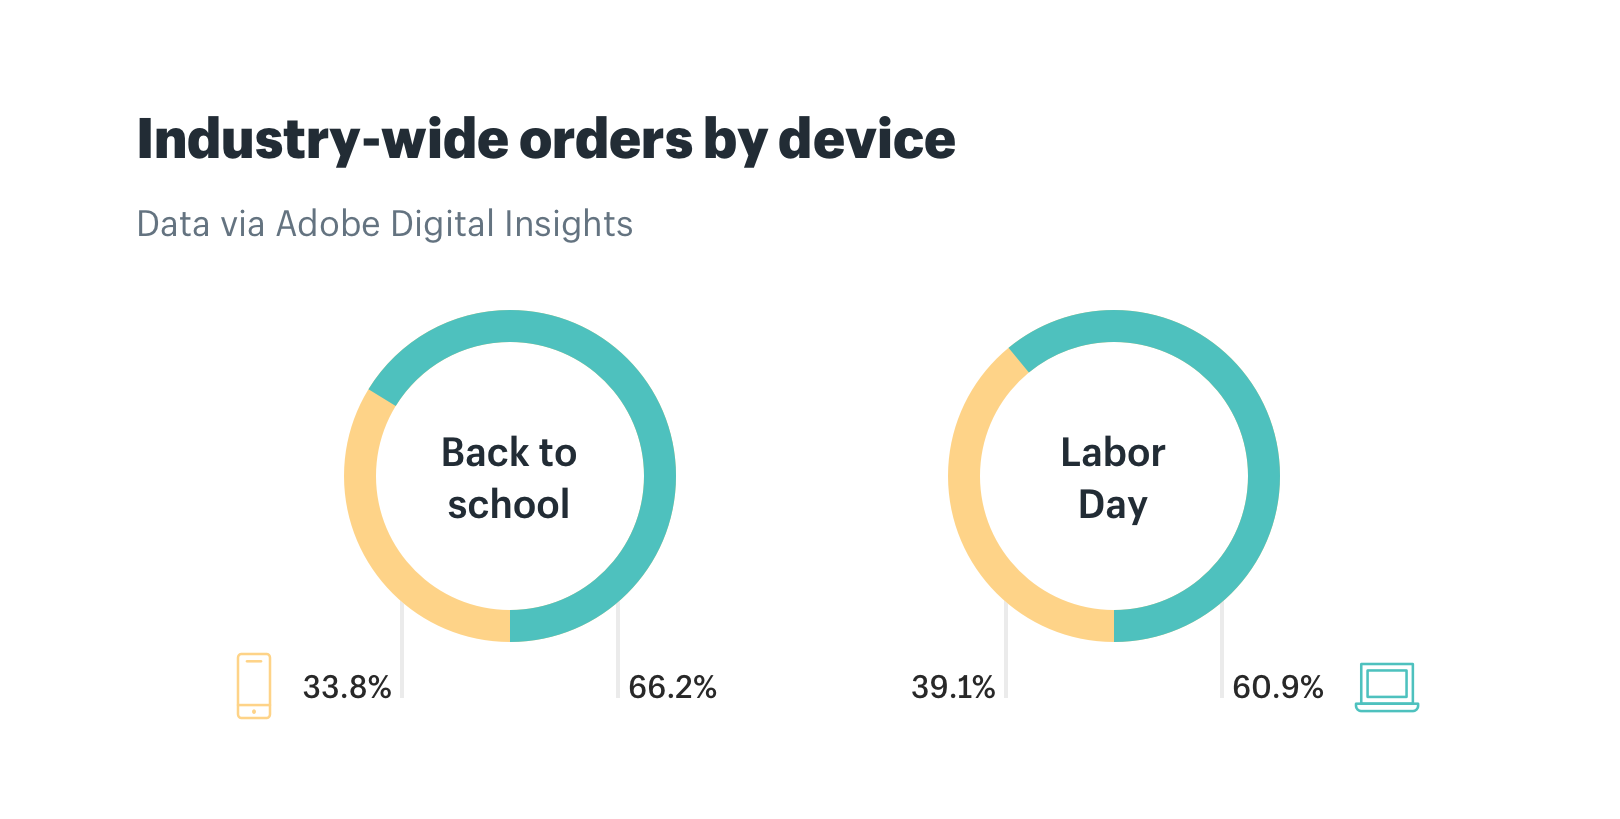 Industry-wide back to school orders by device